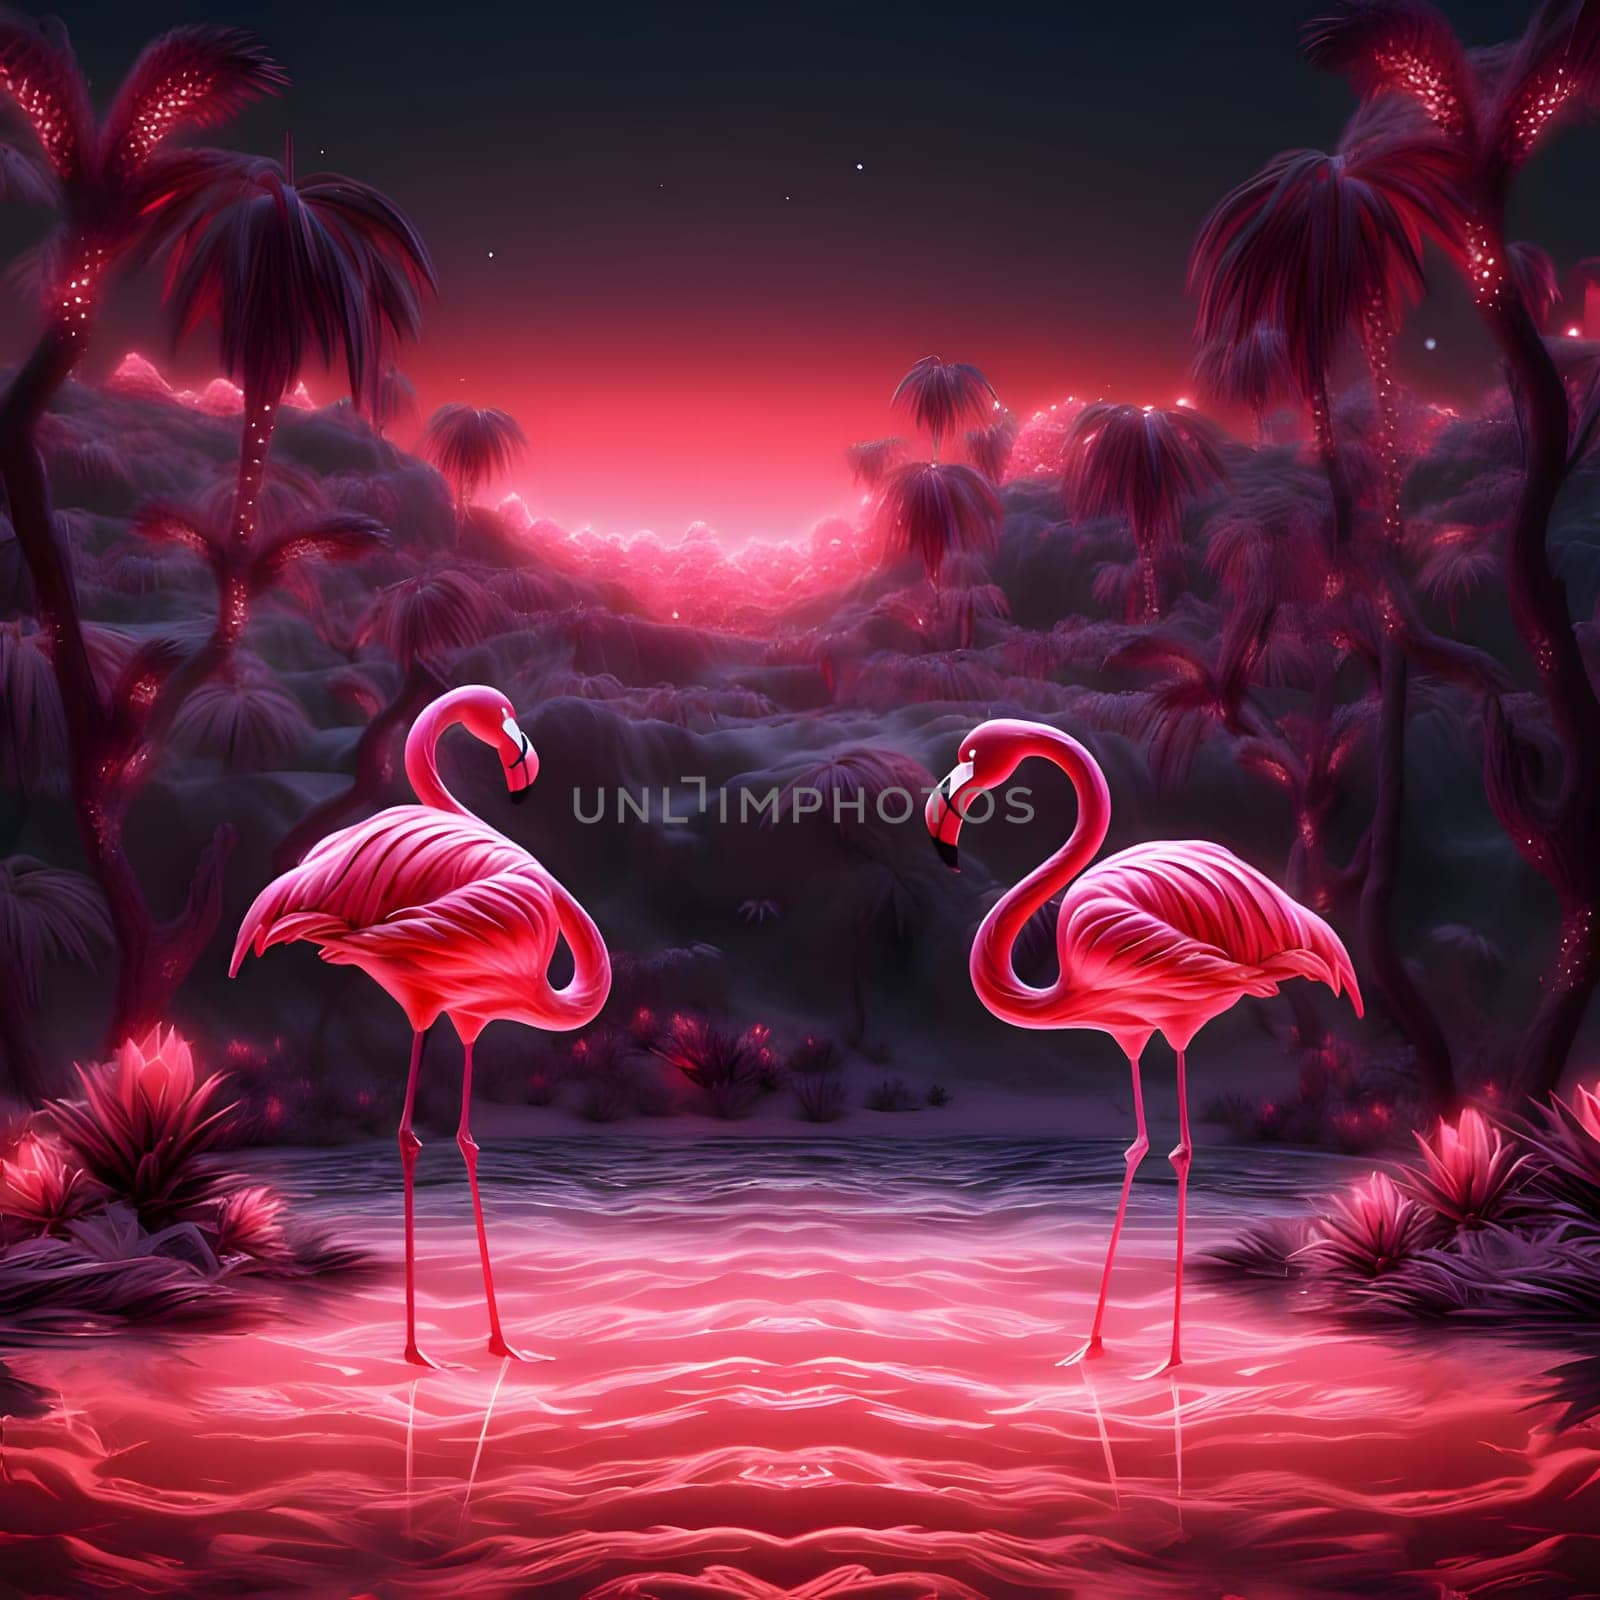 Patterns and banners backgrounds: Flamingo in the swamp at night. Elements of this image furnished by NASA